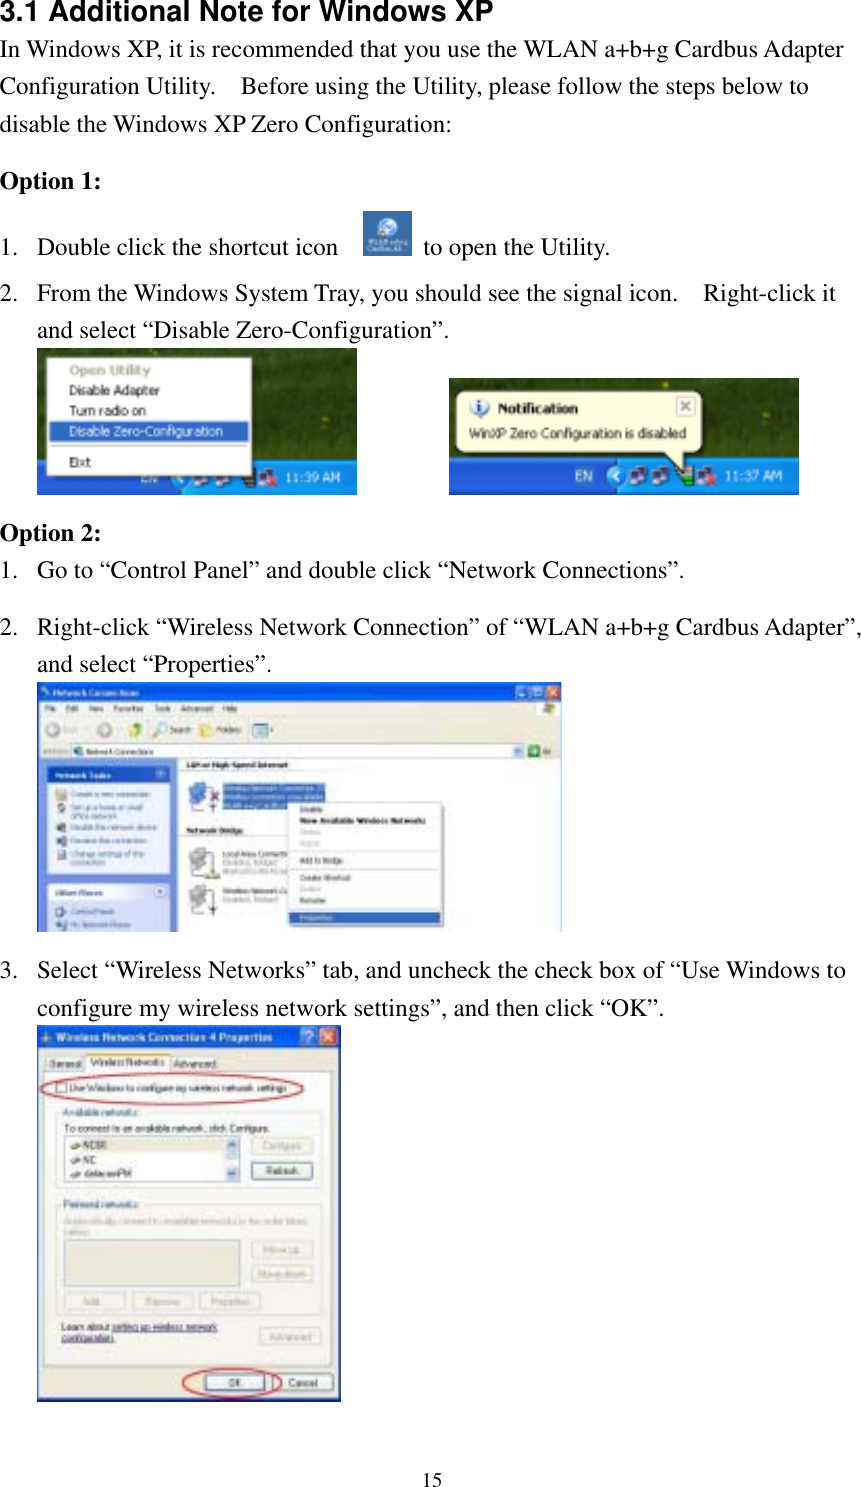  153.1 Additional Note for Windows XP   In Windows XP, it is recommended that you use the WLAN a+b+g Cardbus Adapter Configuration Utility.    Before using the Utility, please follow the steps below to disable the Windows XP Zero Configuration:  Option 1: 1.  Double click the shortcut icon      to open the Utility. 2.  From the Windows System Tray, you should see the signal icon.    Right-click it and select “Disable Zero-Configuration”.     Option 2: 1.  Go to “Control Panel” and double click “Network Connections”.  2.  Right-click “Wireless Network Connection” of “WLAN a+b+g Cardbus Adapter”, and select “Properties”.   3.  Select “Wireless Networks” tab, and uncheck the check box of “Use Windows to configure my wireless network settings”, and then click “OK”.  